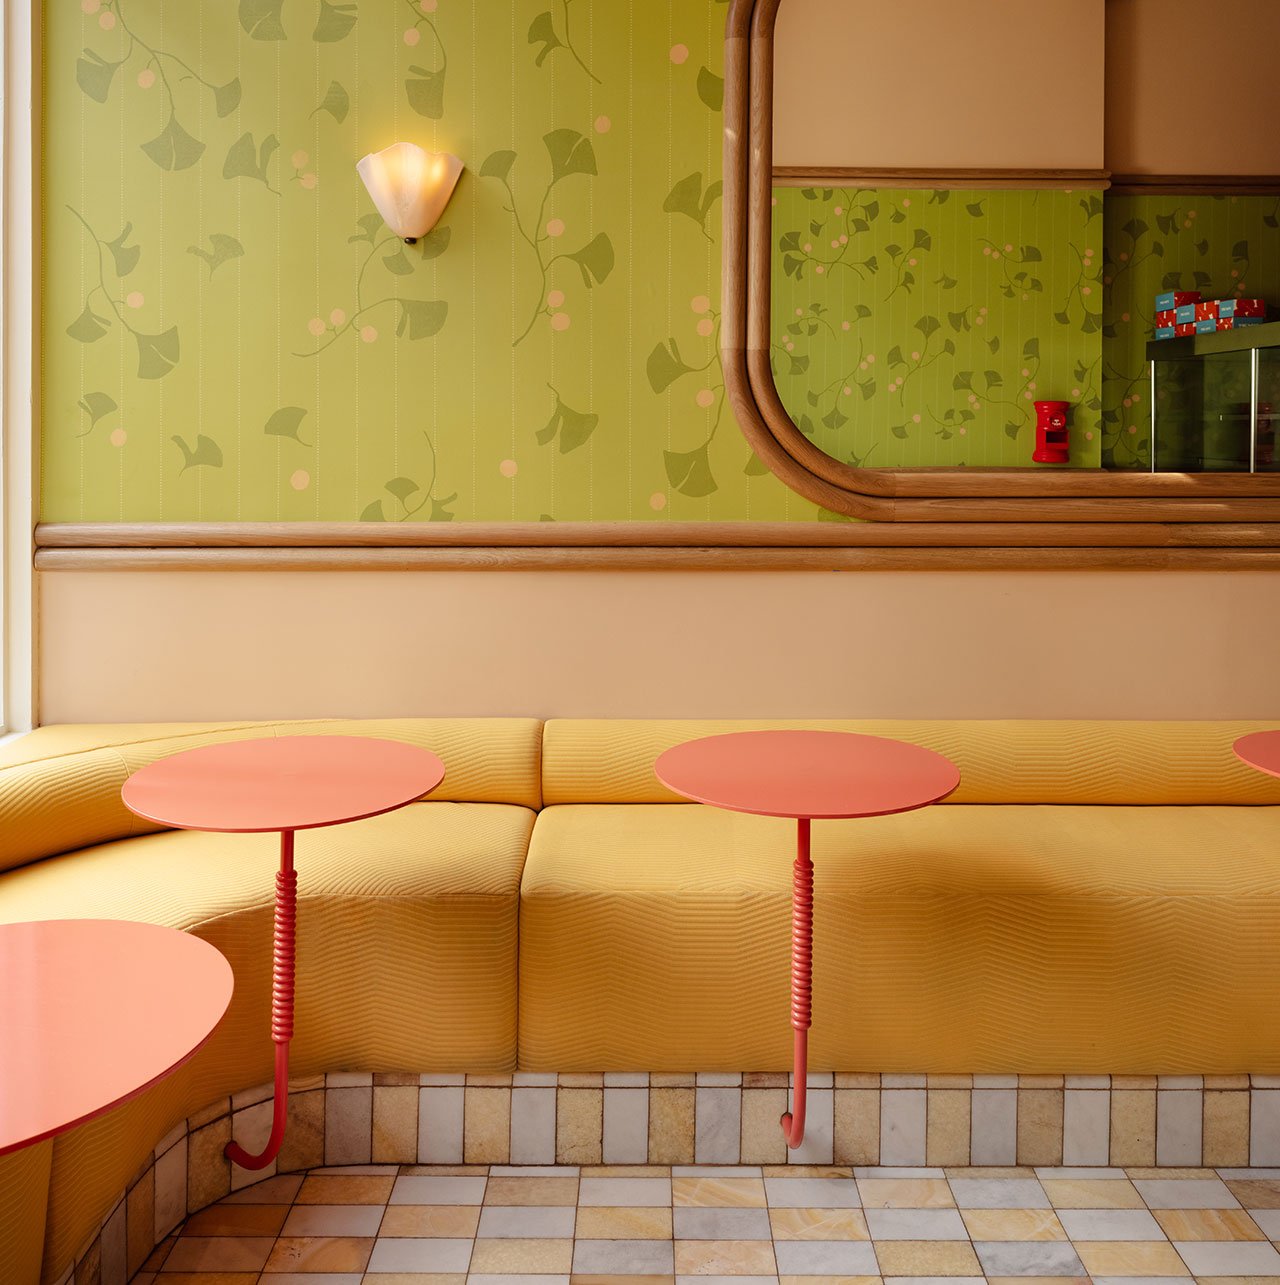 Postcard Bakery Features Bold Color and Pattern Inspired by Retro Japanese Design